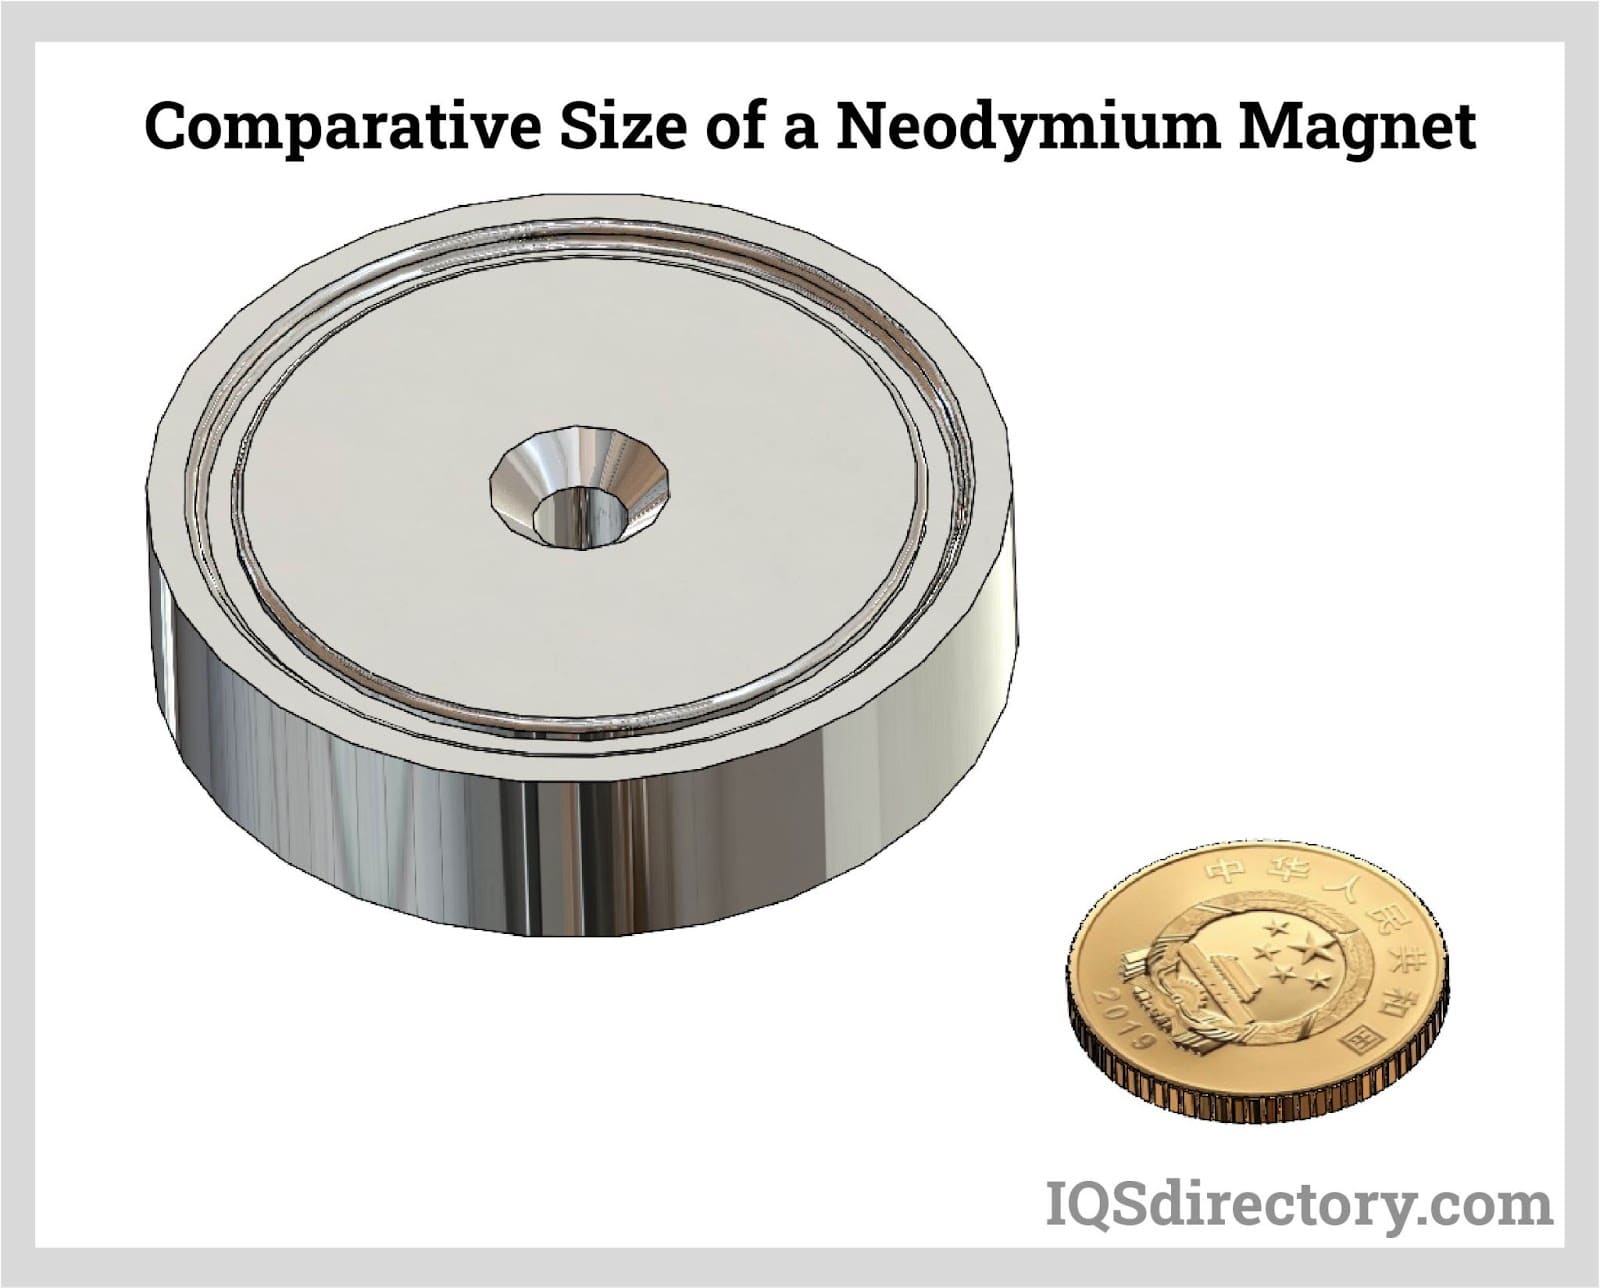 Comparative Size of a Neodymium Magnet